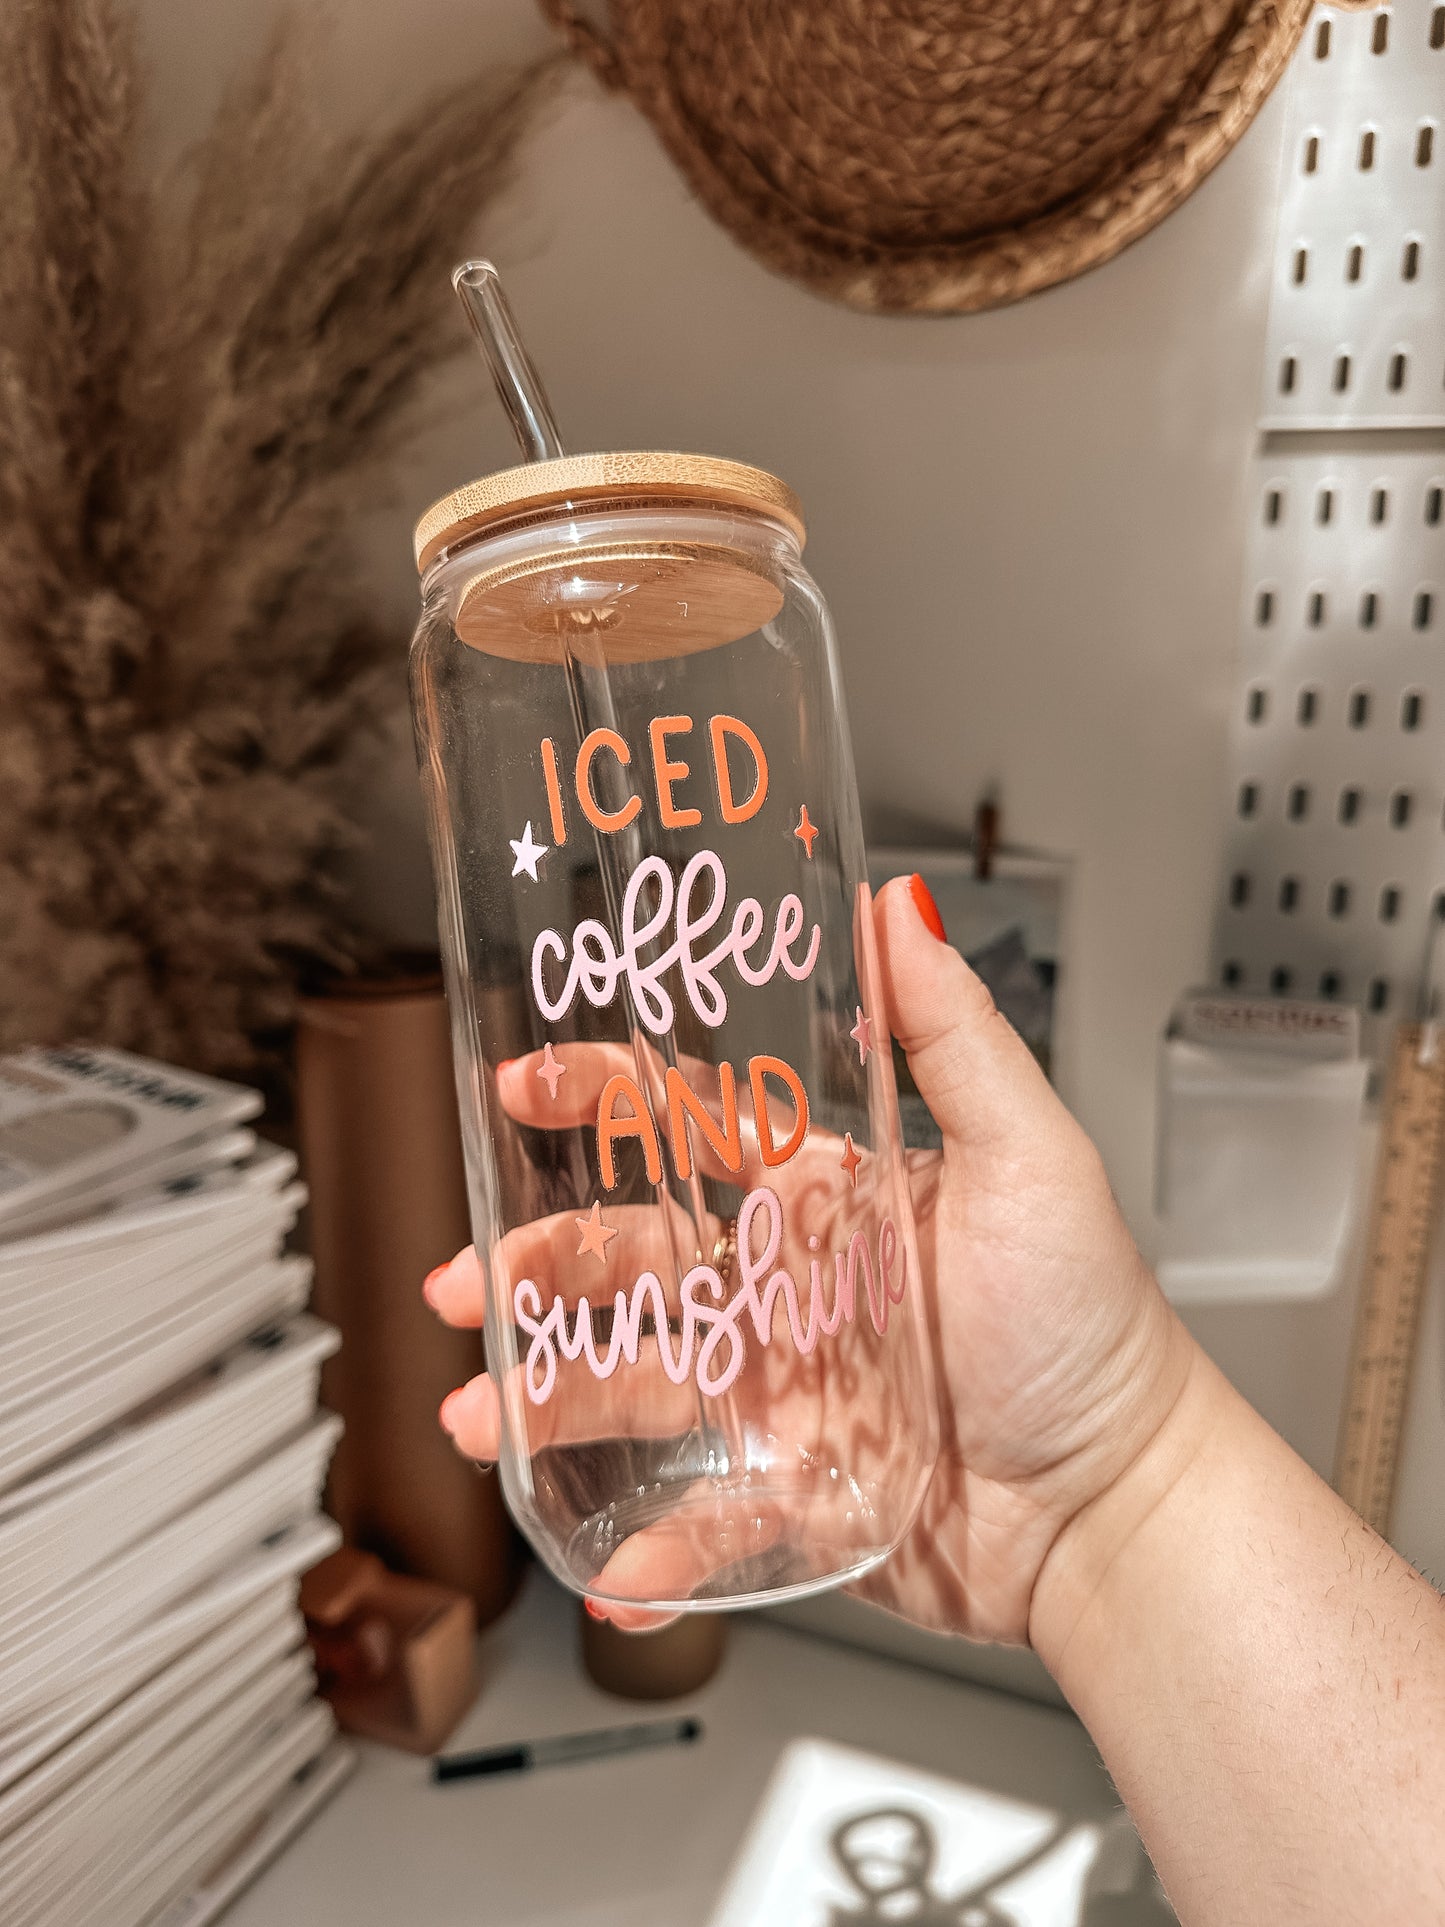 Iced Coffee and Sunshine Cup, Iced Coffee Glass Cup, Cute Aesthetic Glass  Cups, Coffee Lover Gifts, 16 oz Coffee Cup, 20 oz Coffee Cup